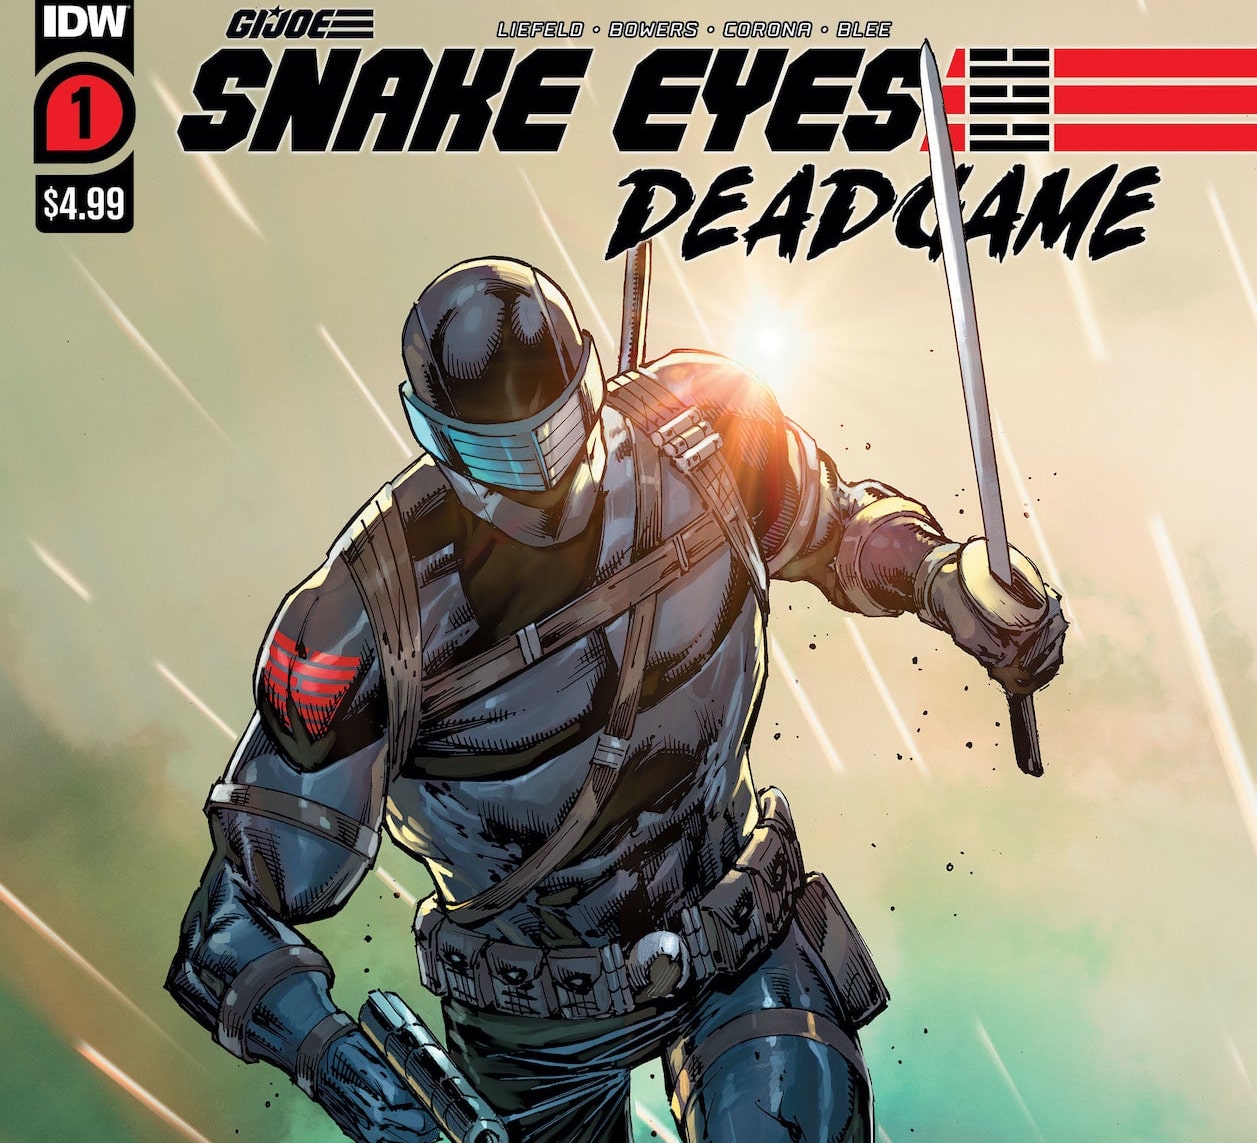 Rob Liefeld's 'Snake Eyes: Deadgame' #1 gets second printing